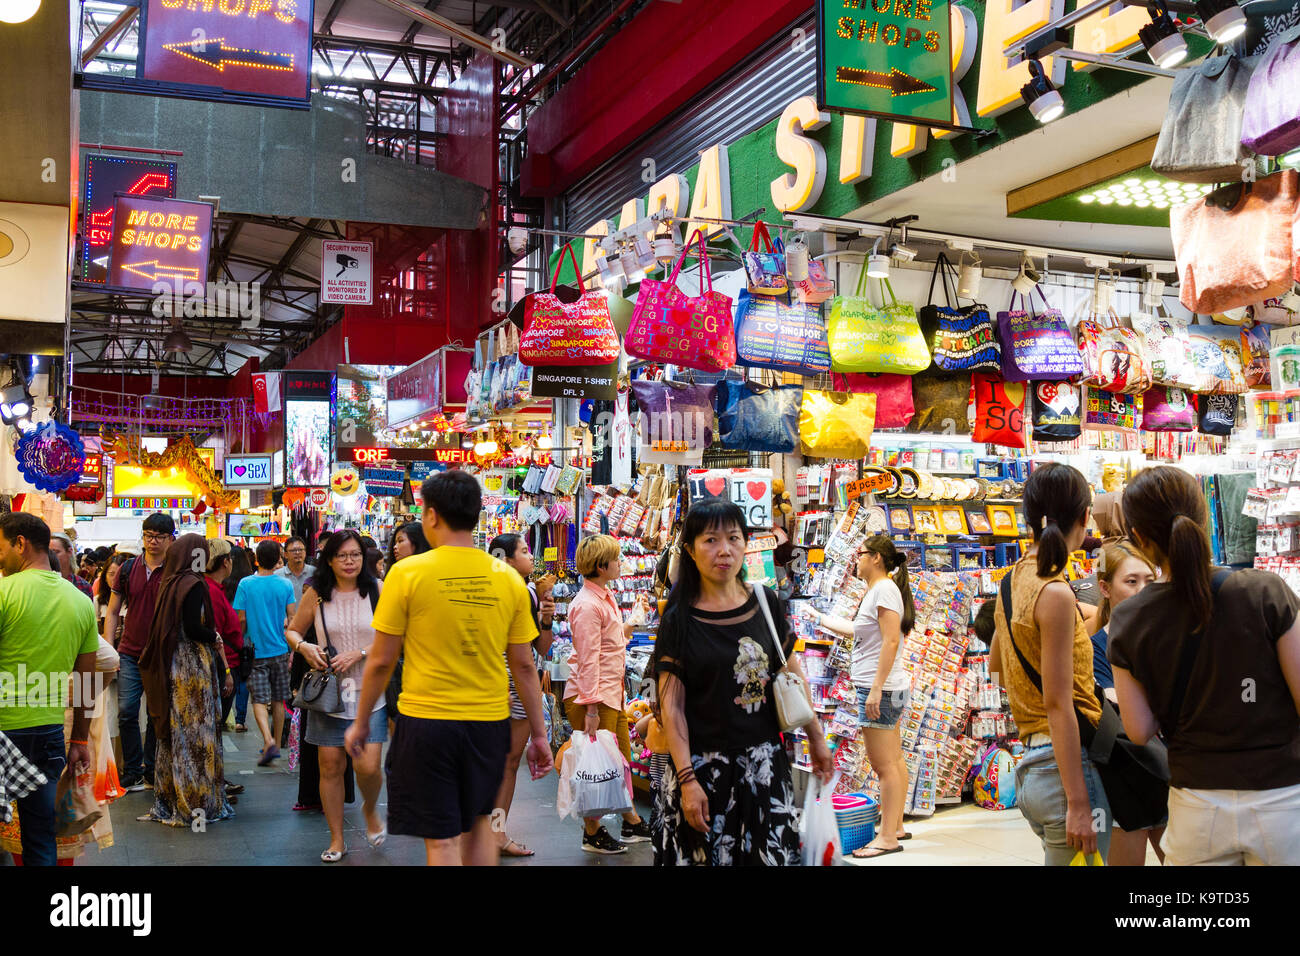 SINGAPORE - SEPTEMBER 7 ,2017: Shoppers at the famous Bugis Street Market, a bargain place renowned for cheap food; clothing, souvenirs, electronics,  Stock Photo